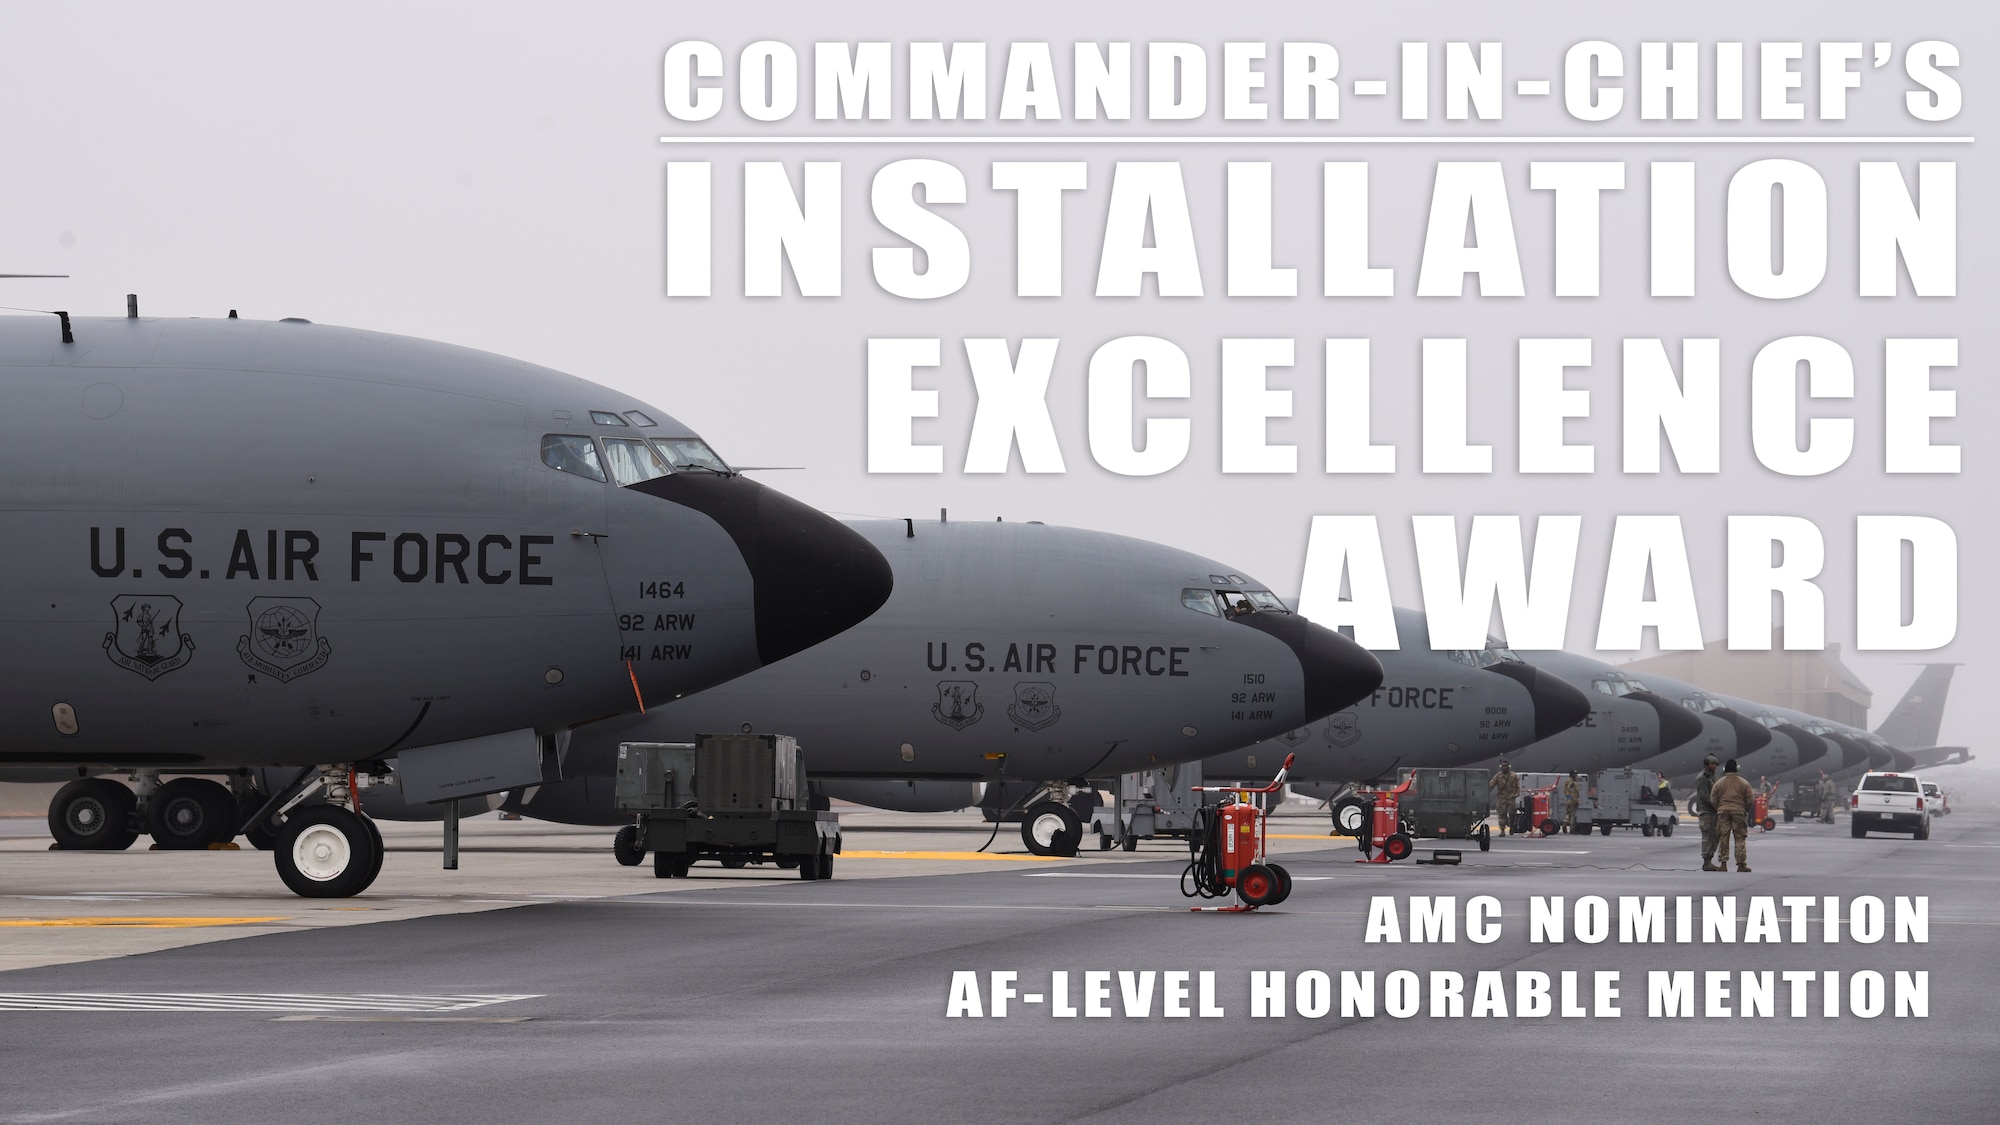 Fairchild Air Force Base was awarded the AMC nomination for the 2019 Commander-in-Chief’s Installation Excellence Award and also earned “Honorable Mention” at Air Force level.